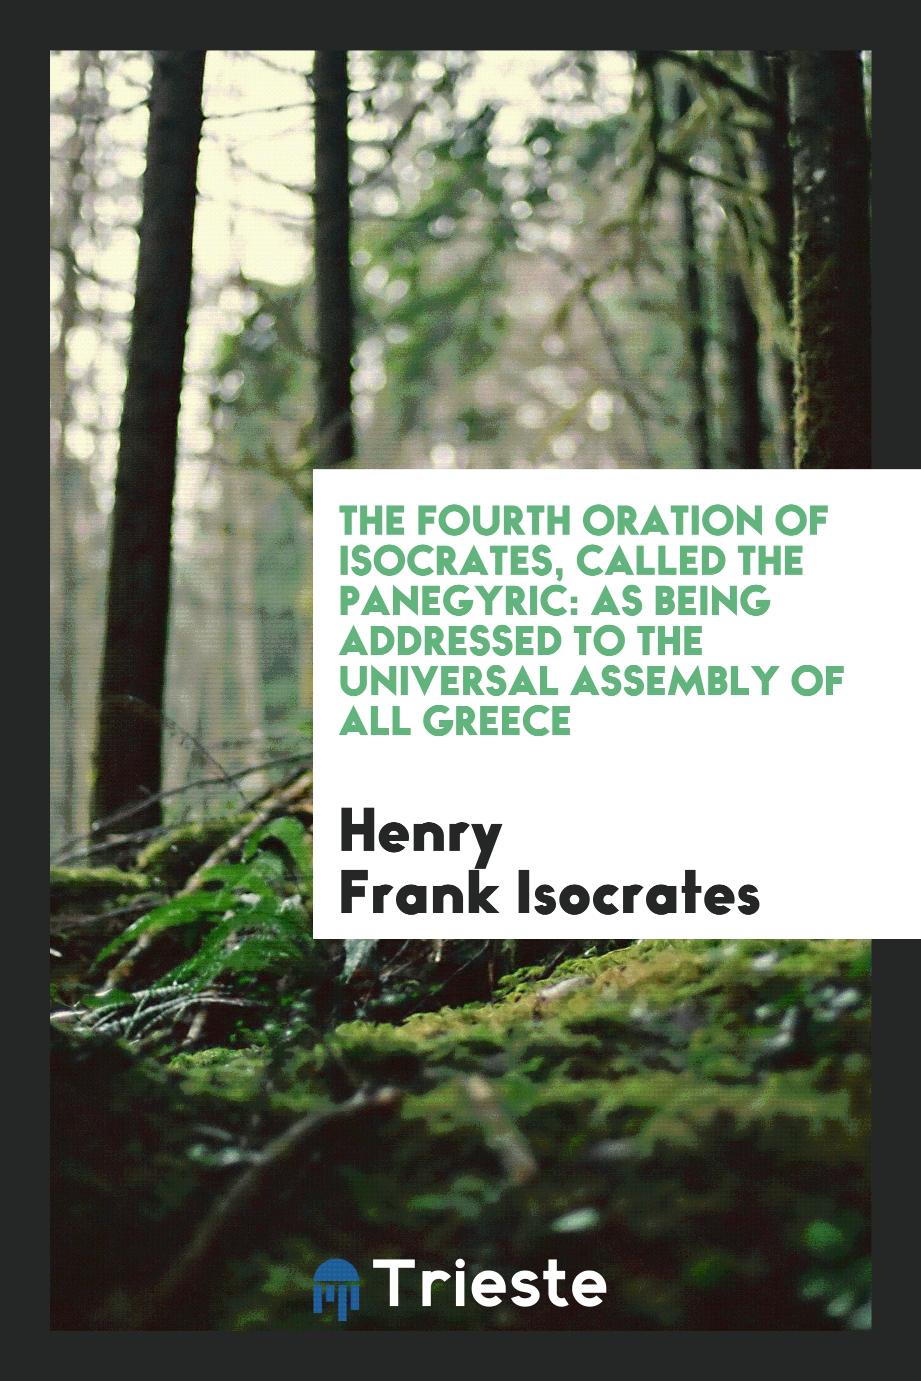 The Fourth Oration of Isocrates, Called the Panegyric: As Being Addressed to the Universal assembly of all greece